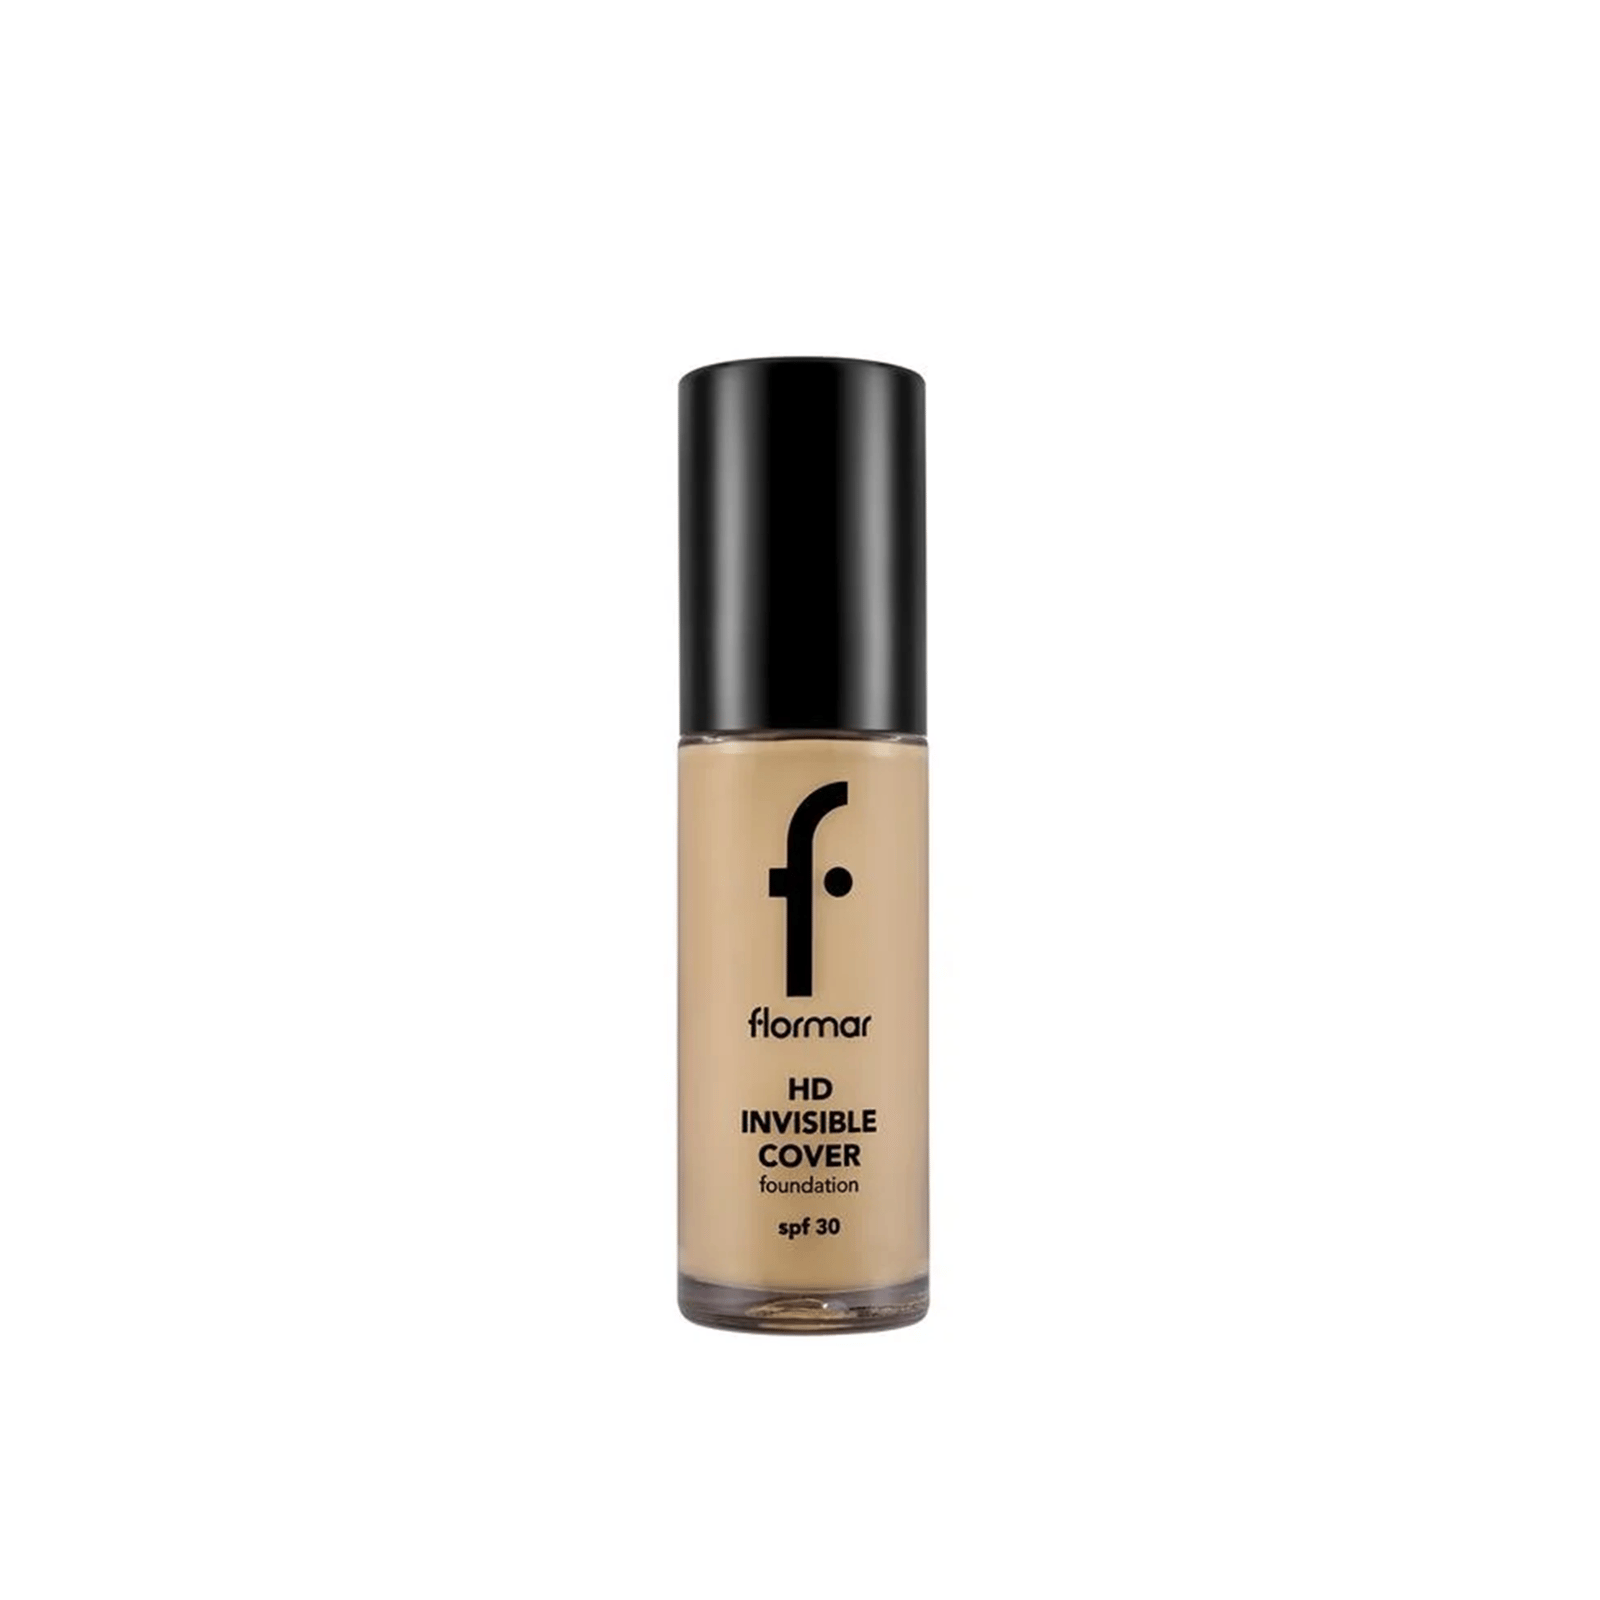 Flormar Invisible Cover HD Foundation SPF30 80 Soft Beige 30ml (1.01floz)